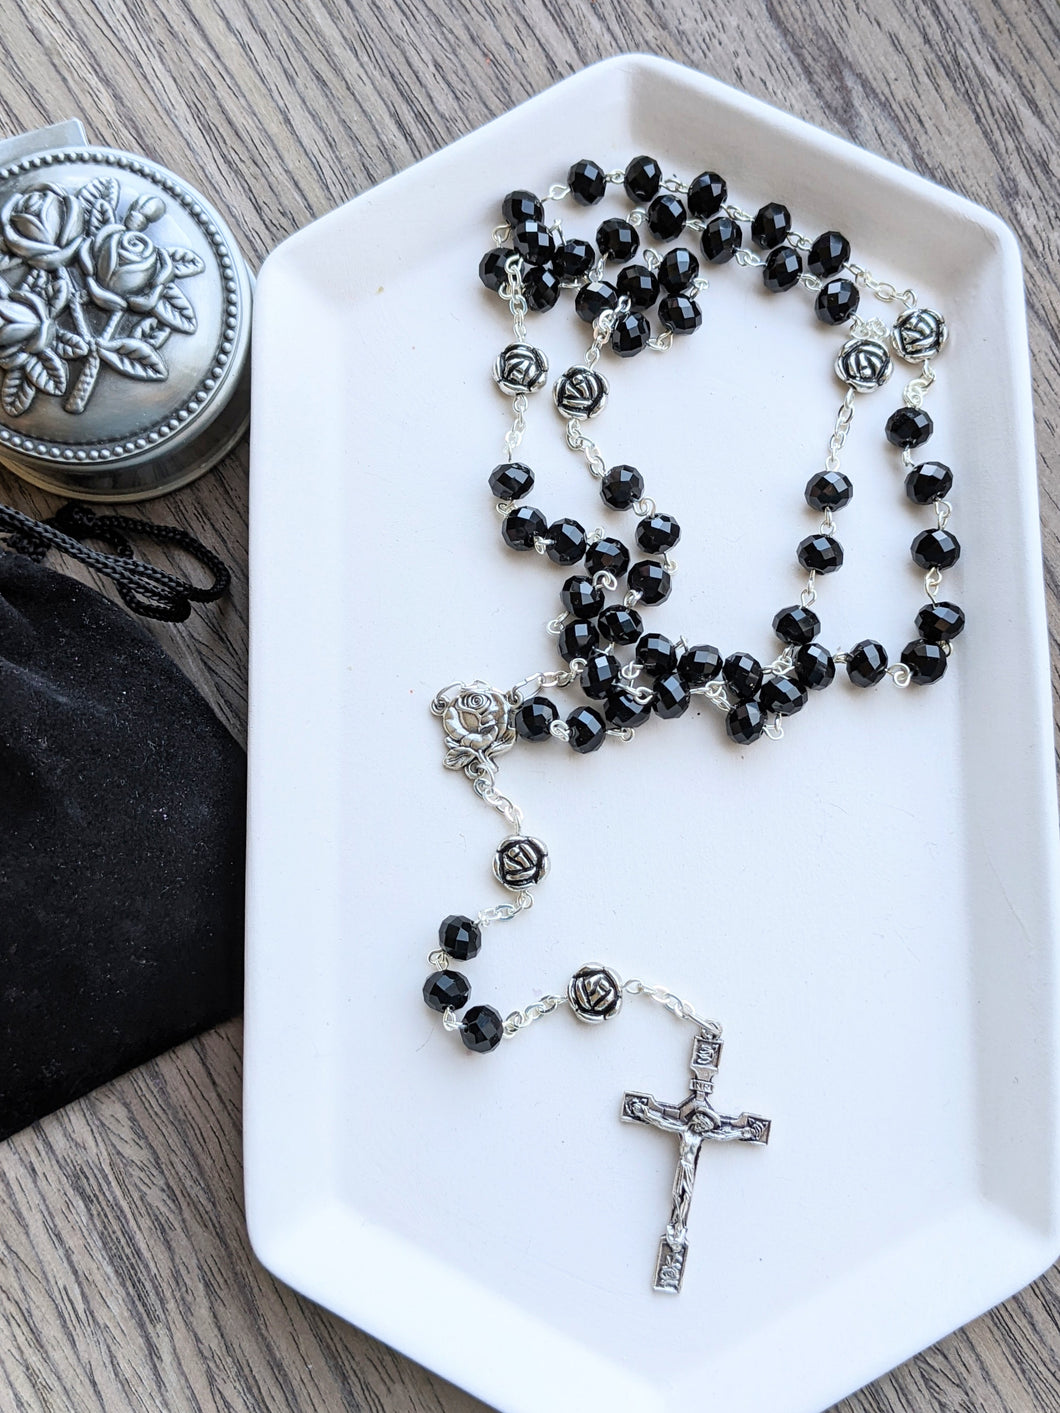 A full sized black crystal glass bead rosary with medal roses for the Our Father beads lays on a white tray. The tray is set on a wooden background with a rosary holder next to it. 